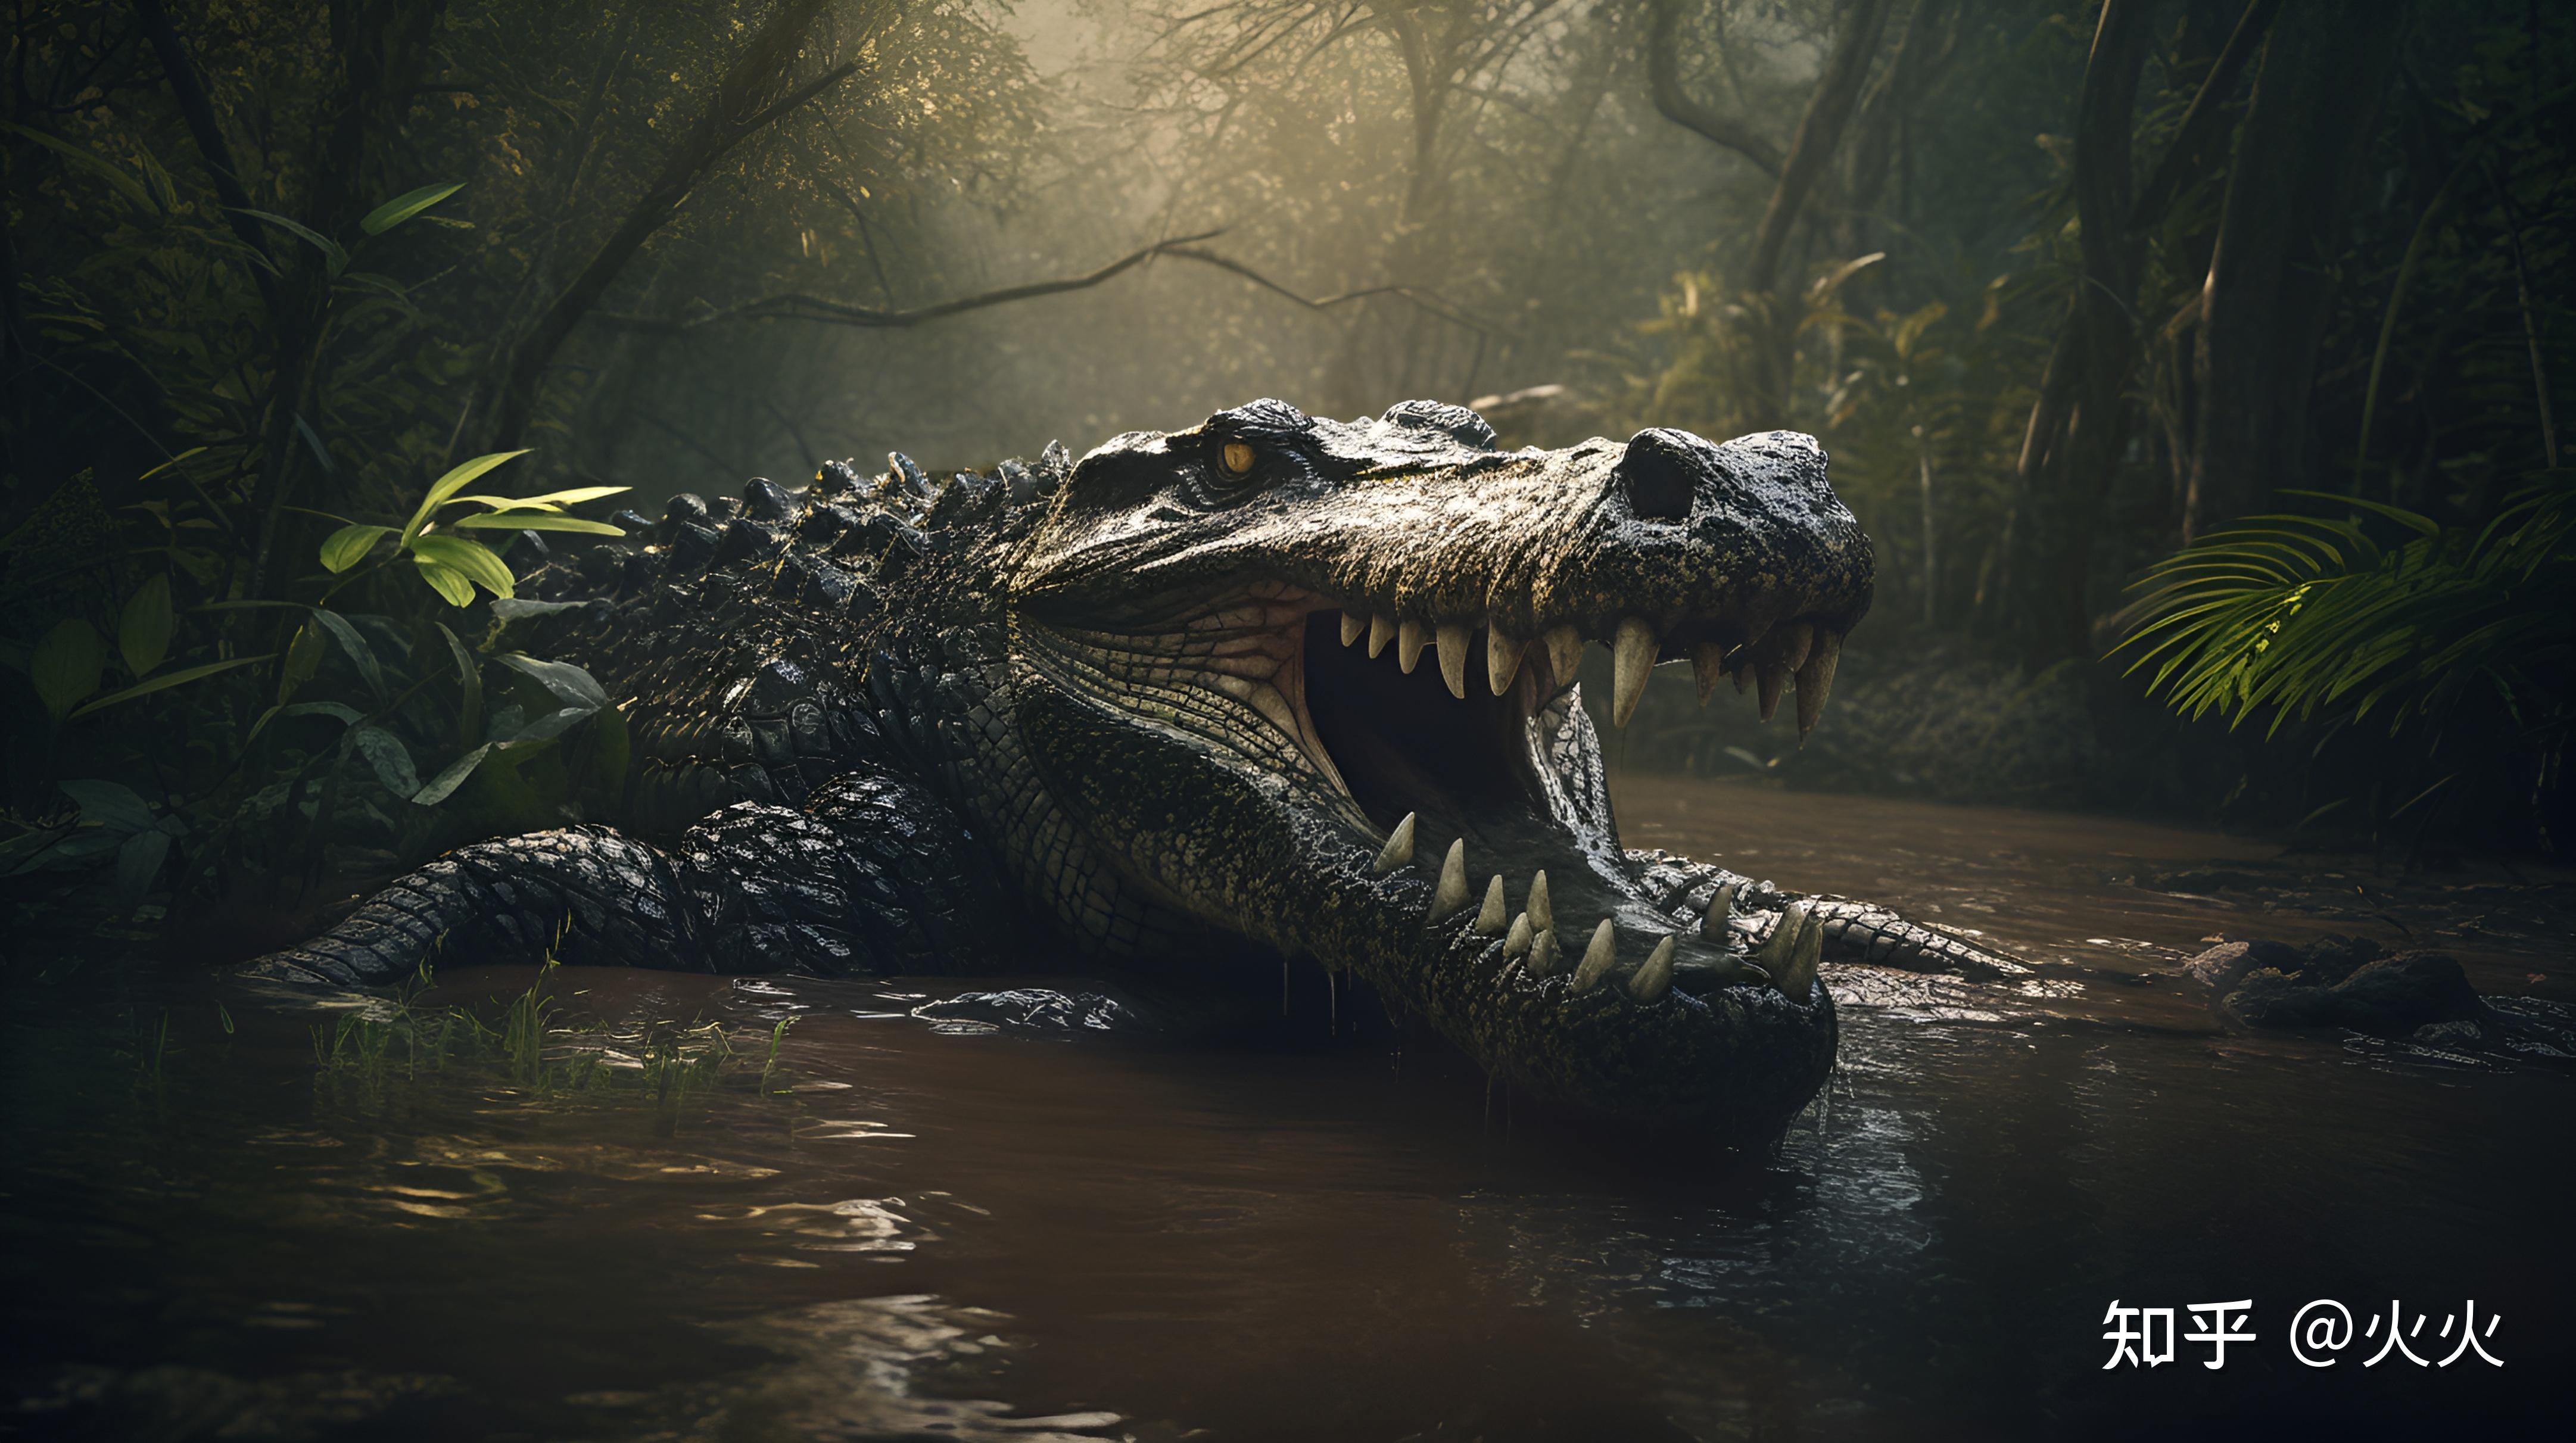 MEGA CROCODILE (2019) Reviews and free to watch online - MOVIES & MANIA